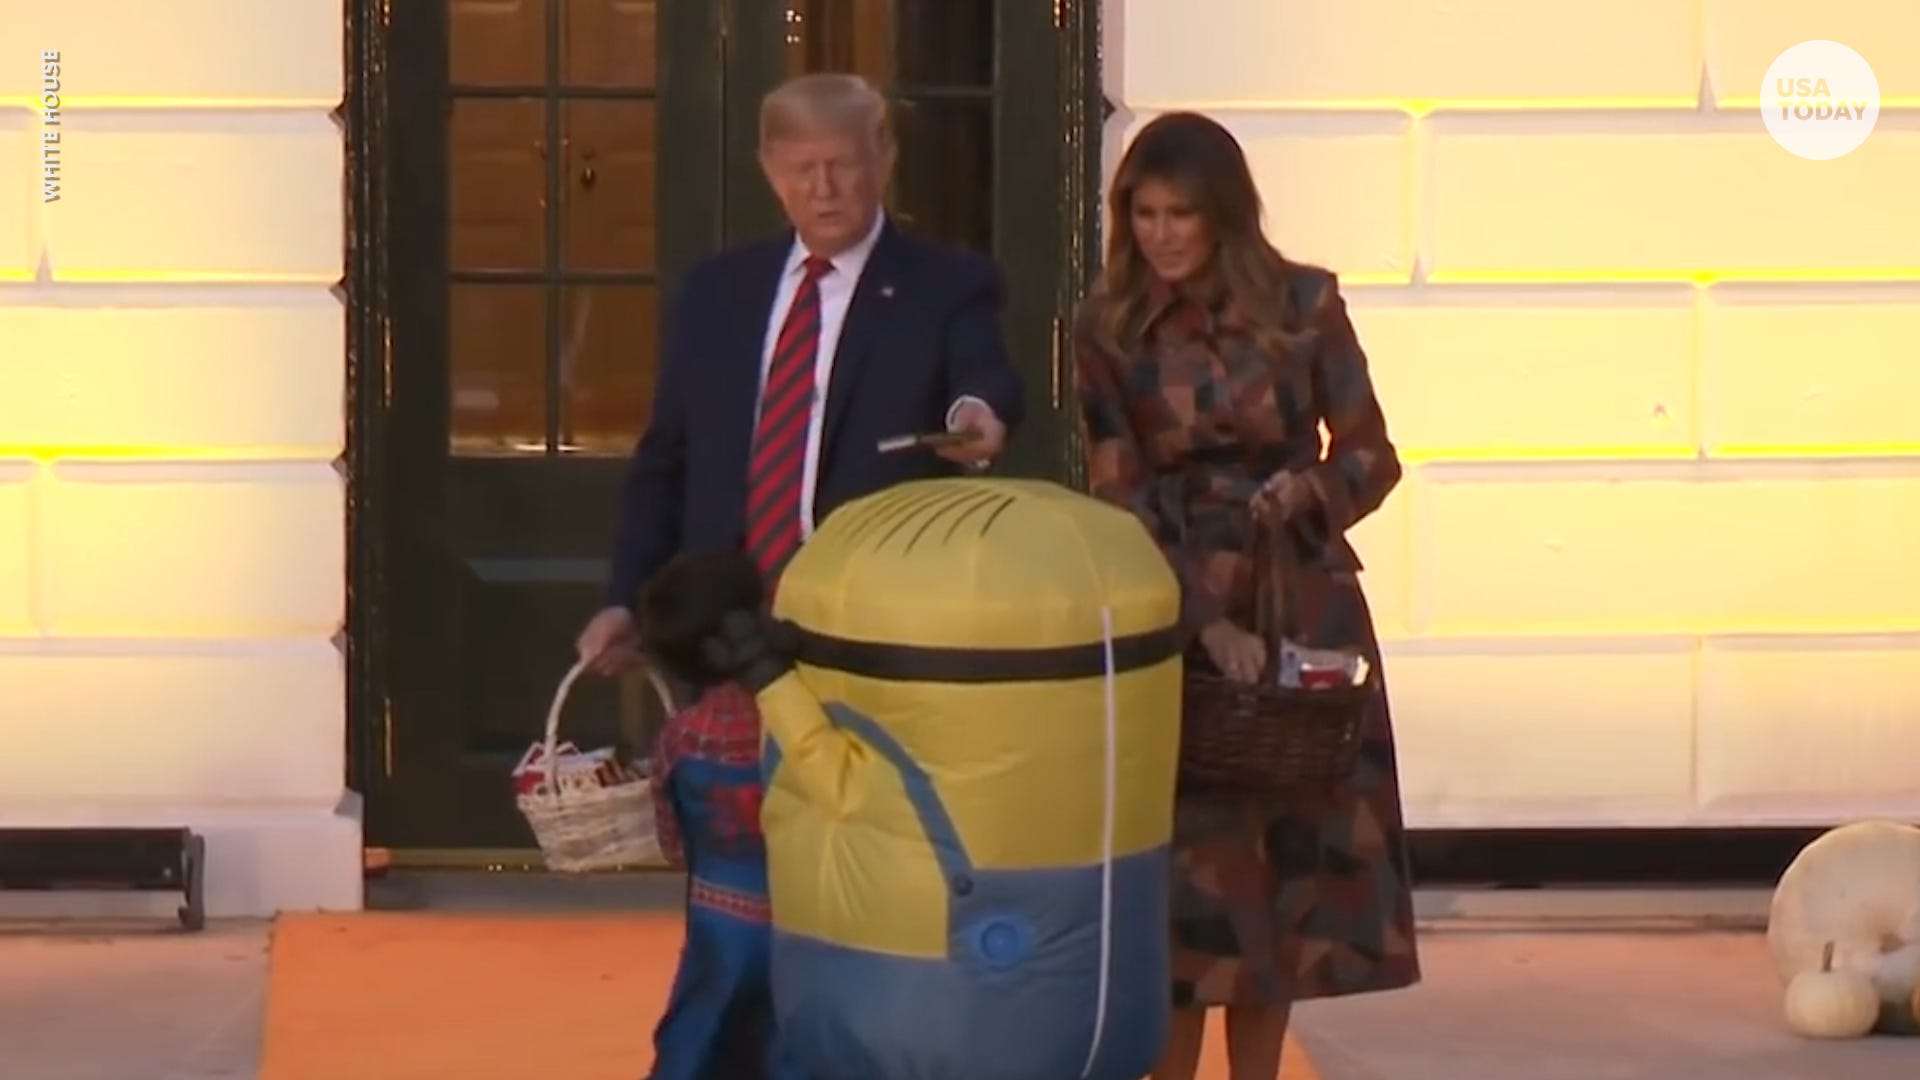 Trump Puts Candy On Child S Minion Halloween Costume At White House